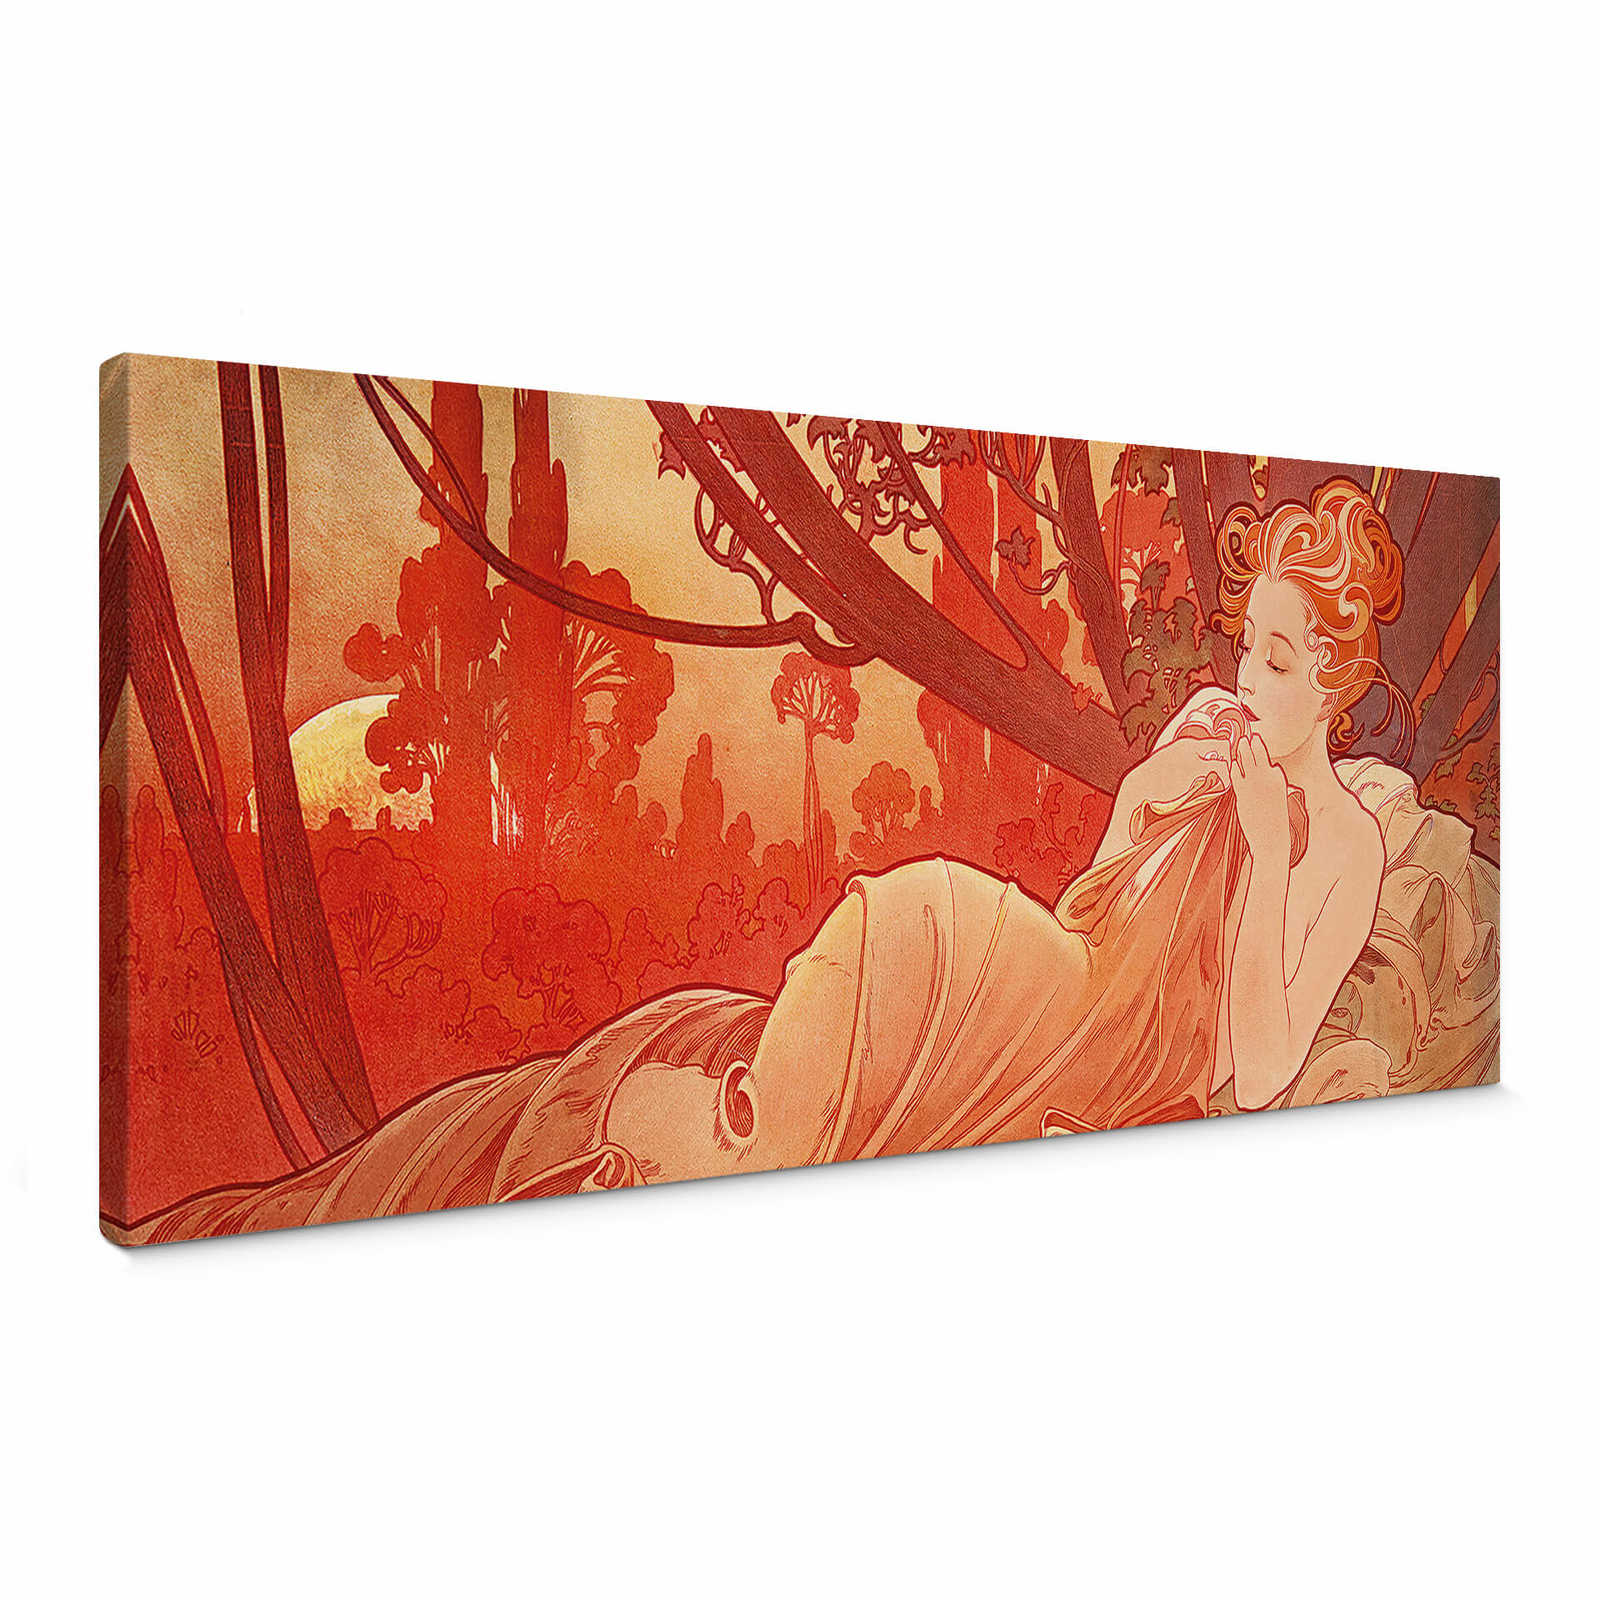 Panoramic canvas print by Mucha "Dusk"
